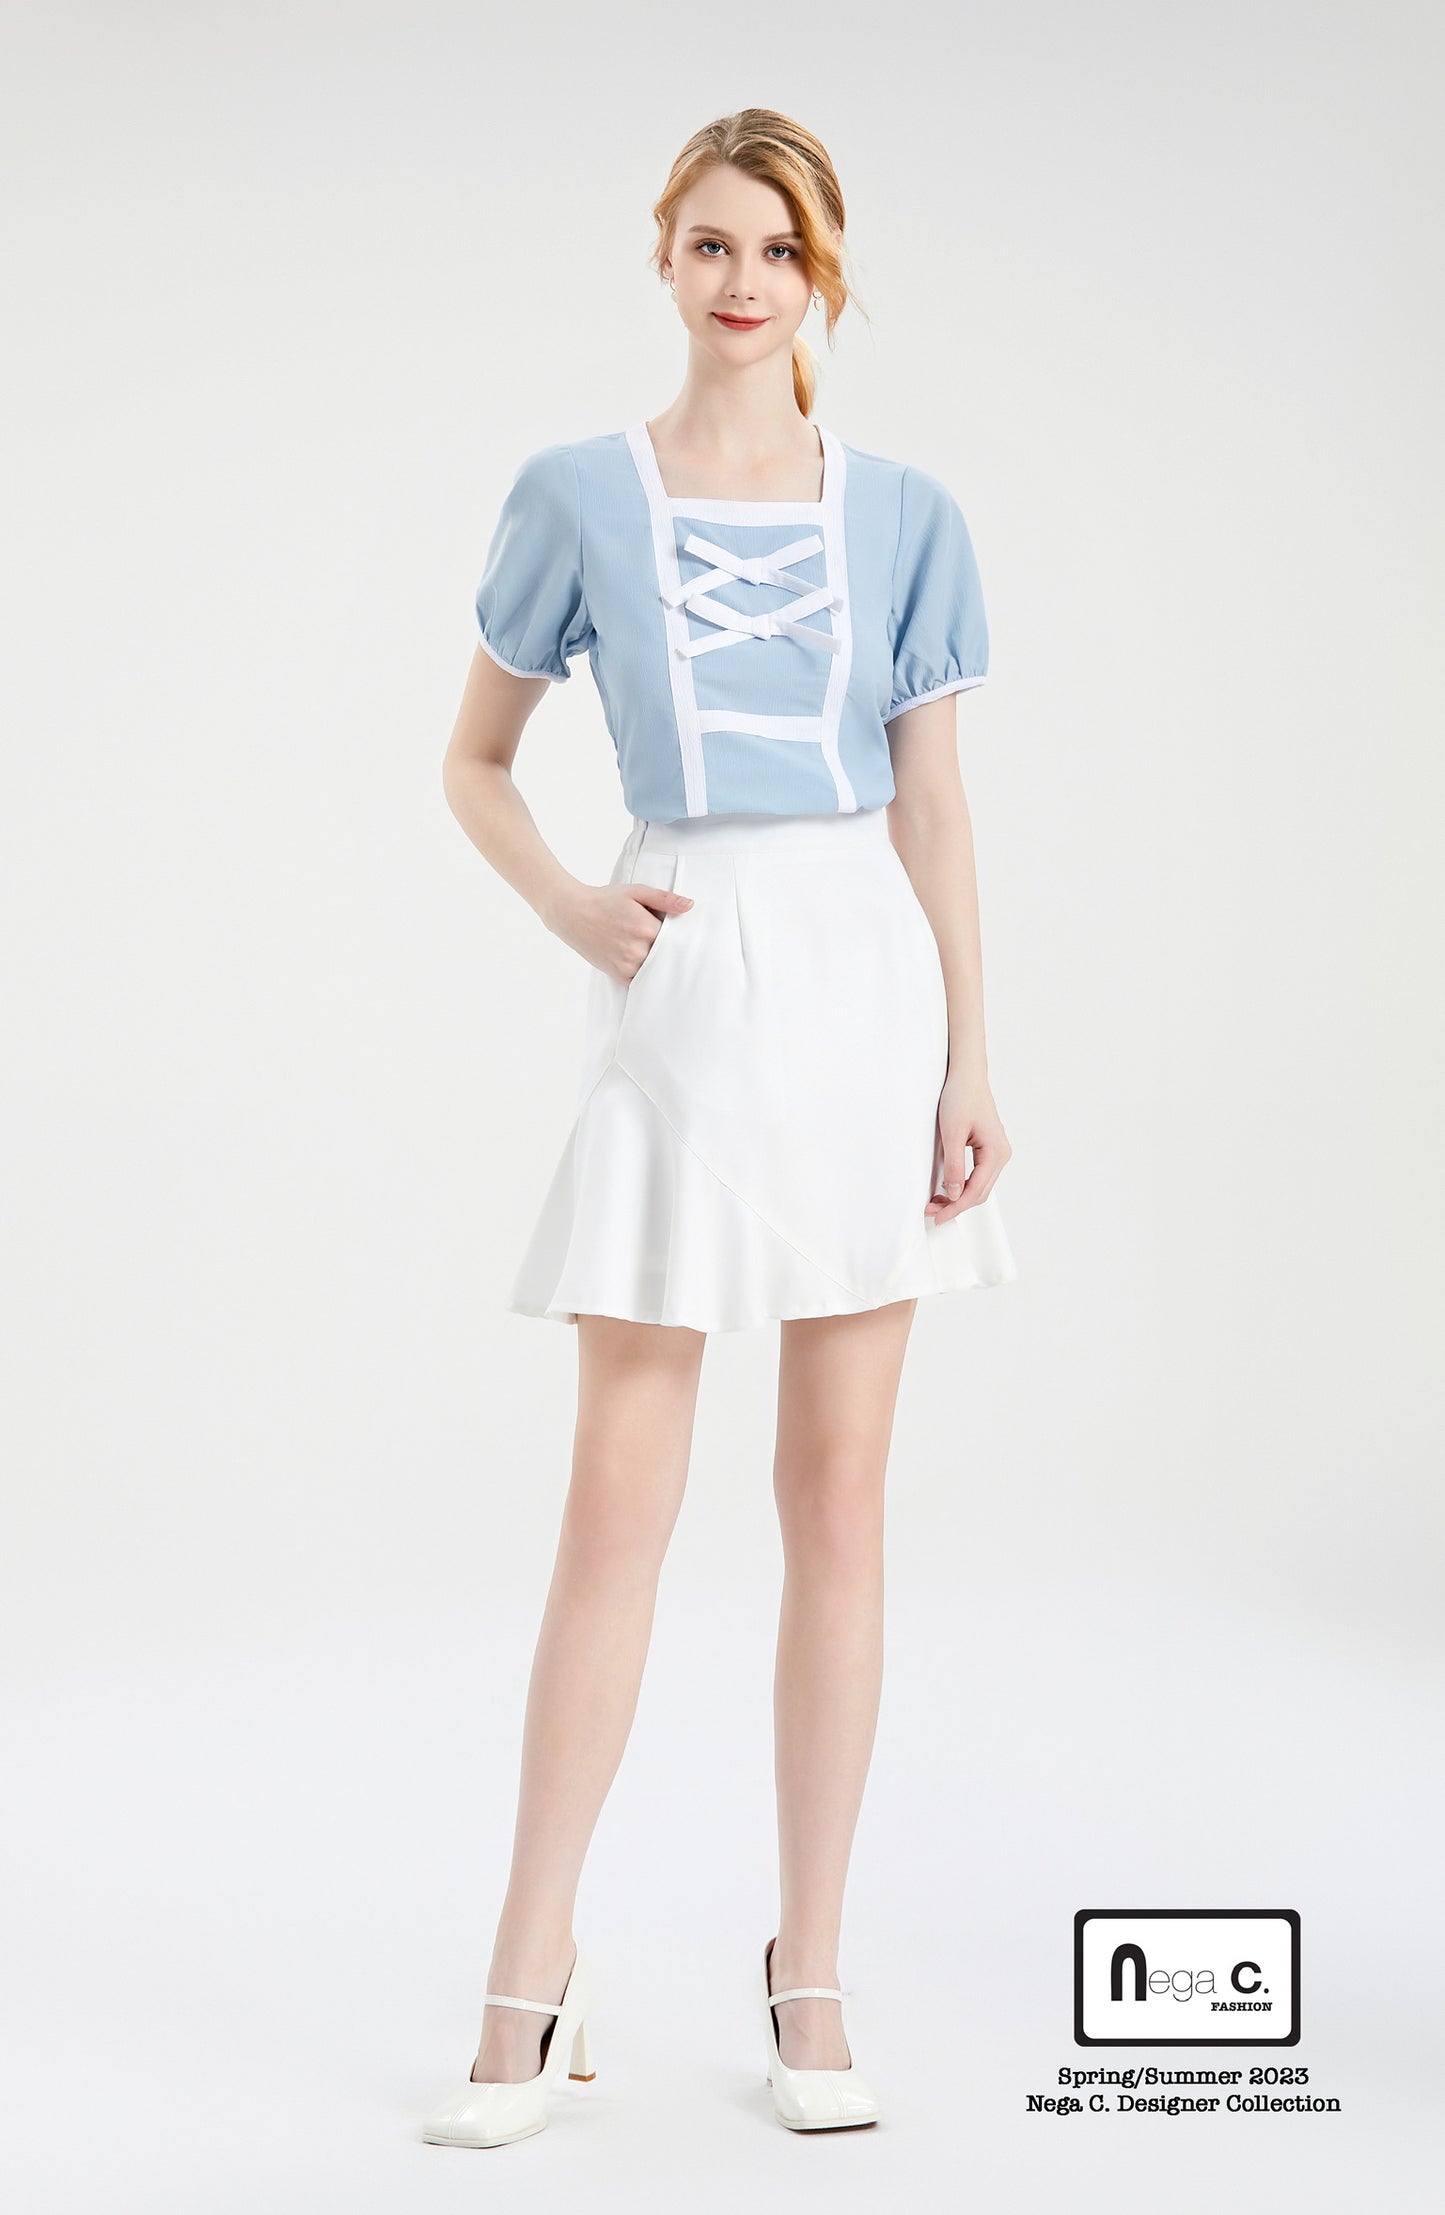 Nega C.Color-blocked square-neck top with double bows details |Blue |With lining